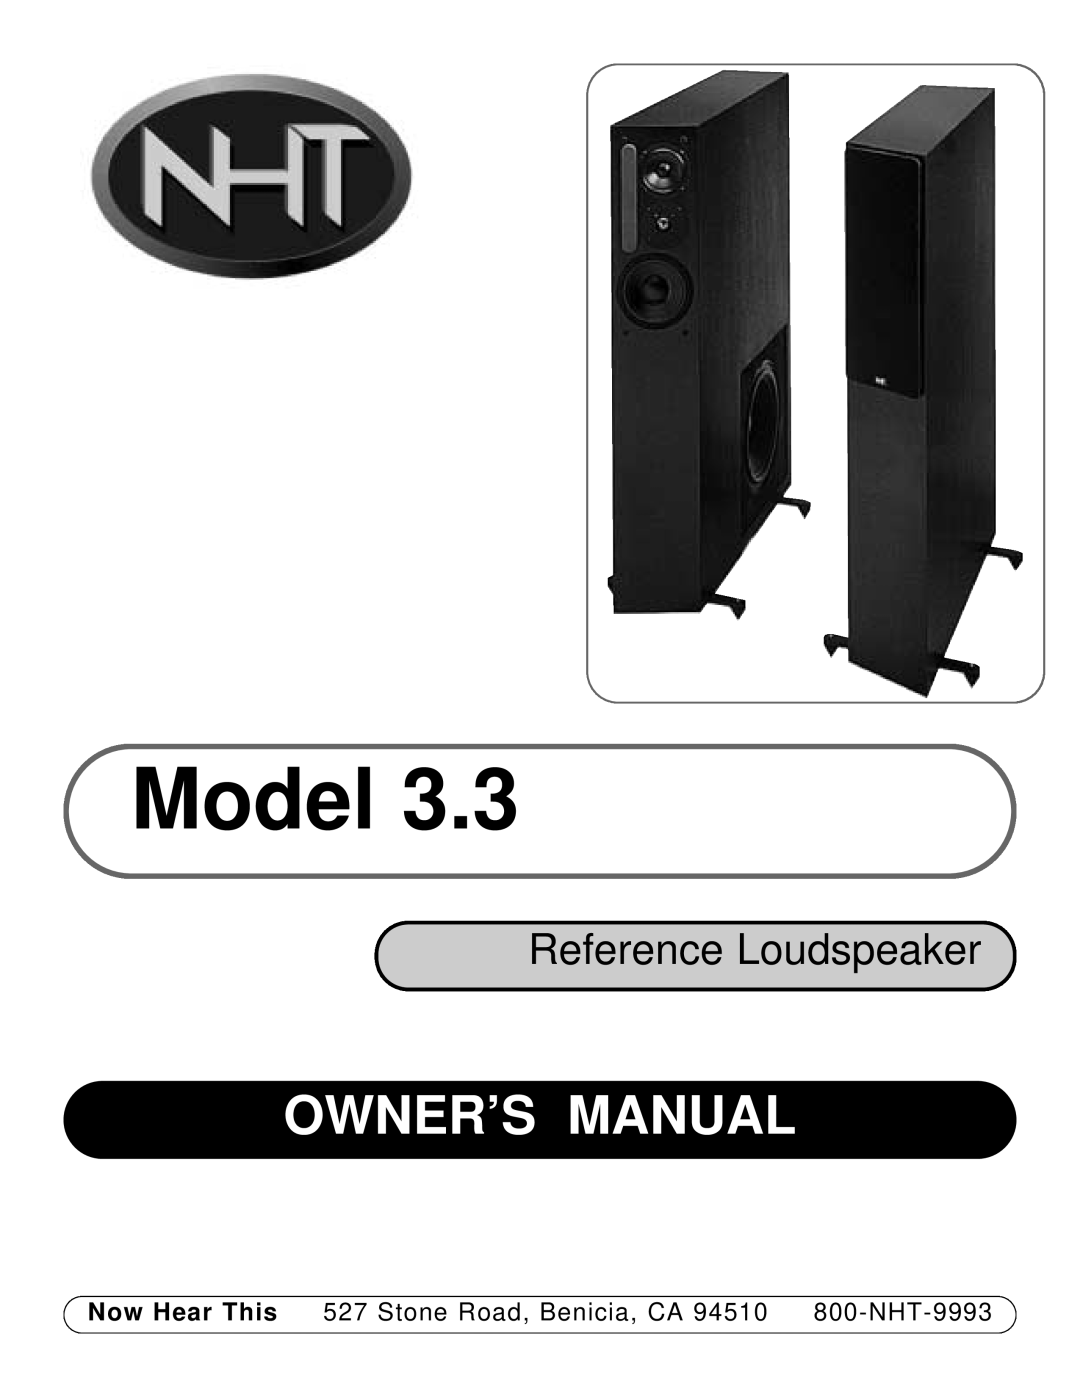 NHT 3.3 owner manual Model, Reference Loudspeaker, Now Hear This 527 Stone Road, Benicia, CA 94510 800-NHT-9993 